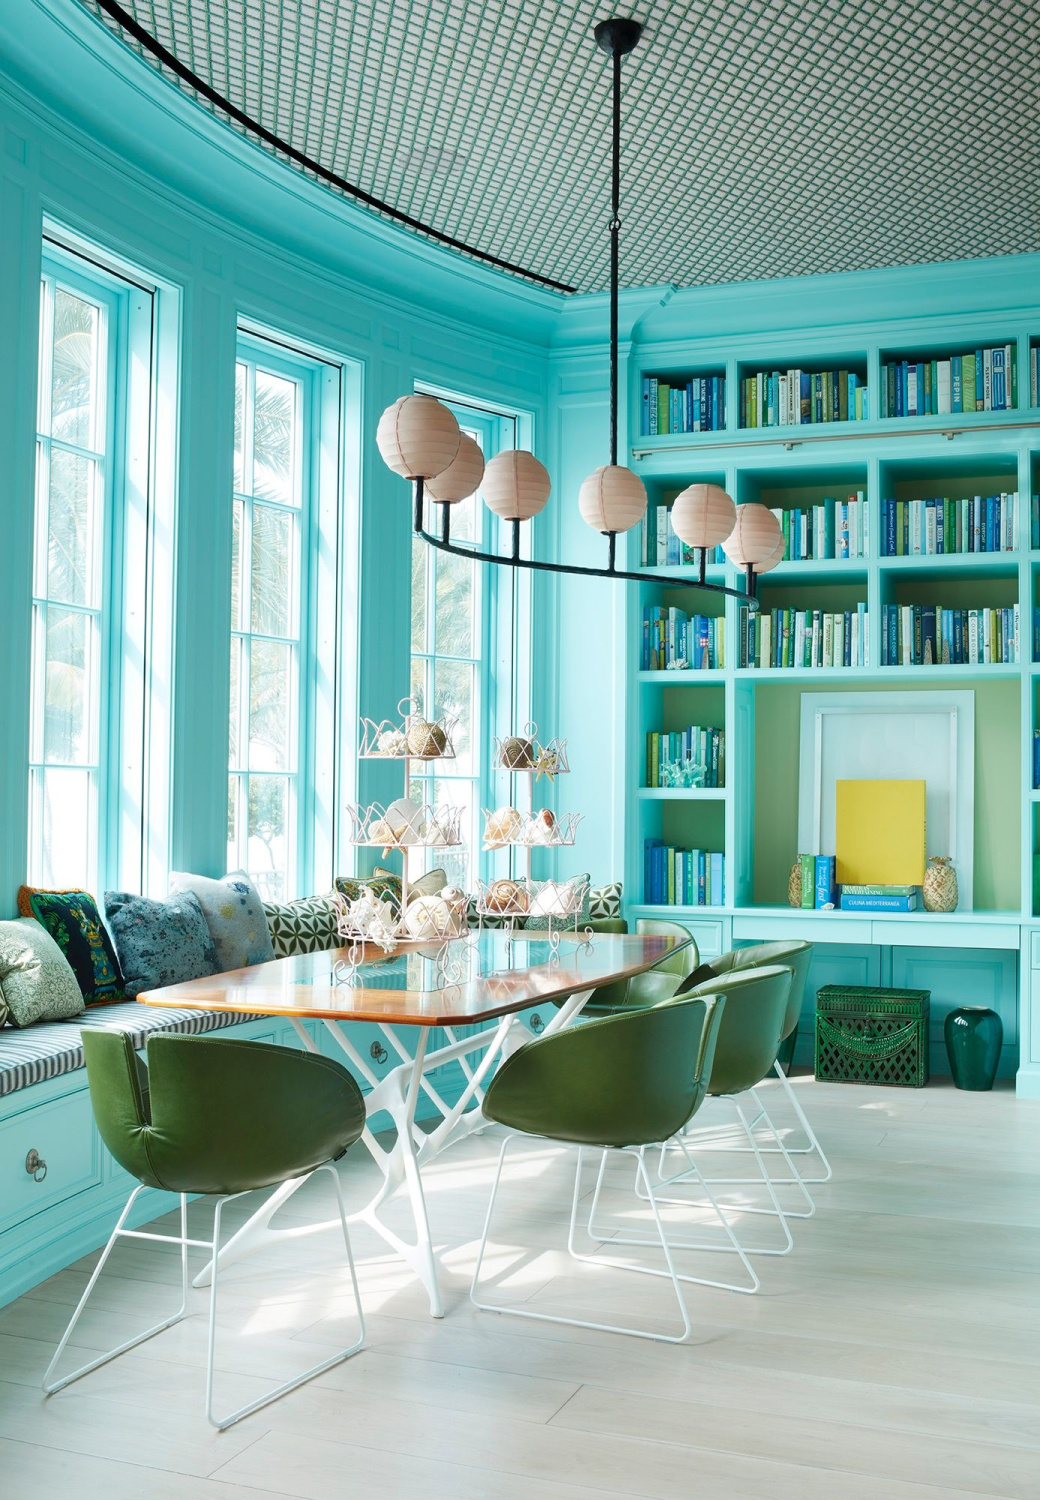 Beautiful bold turquoise in a guest house in Naples by Stephen Sills in A VISION FOR DESIGN (2022). #stephensills